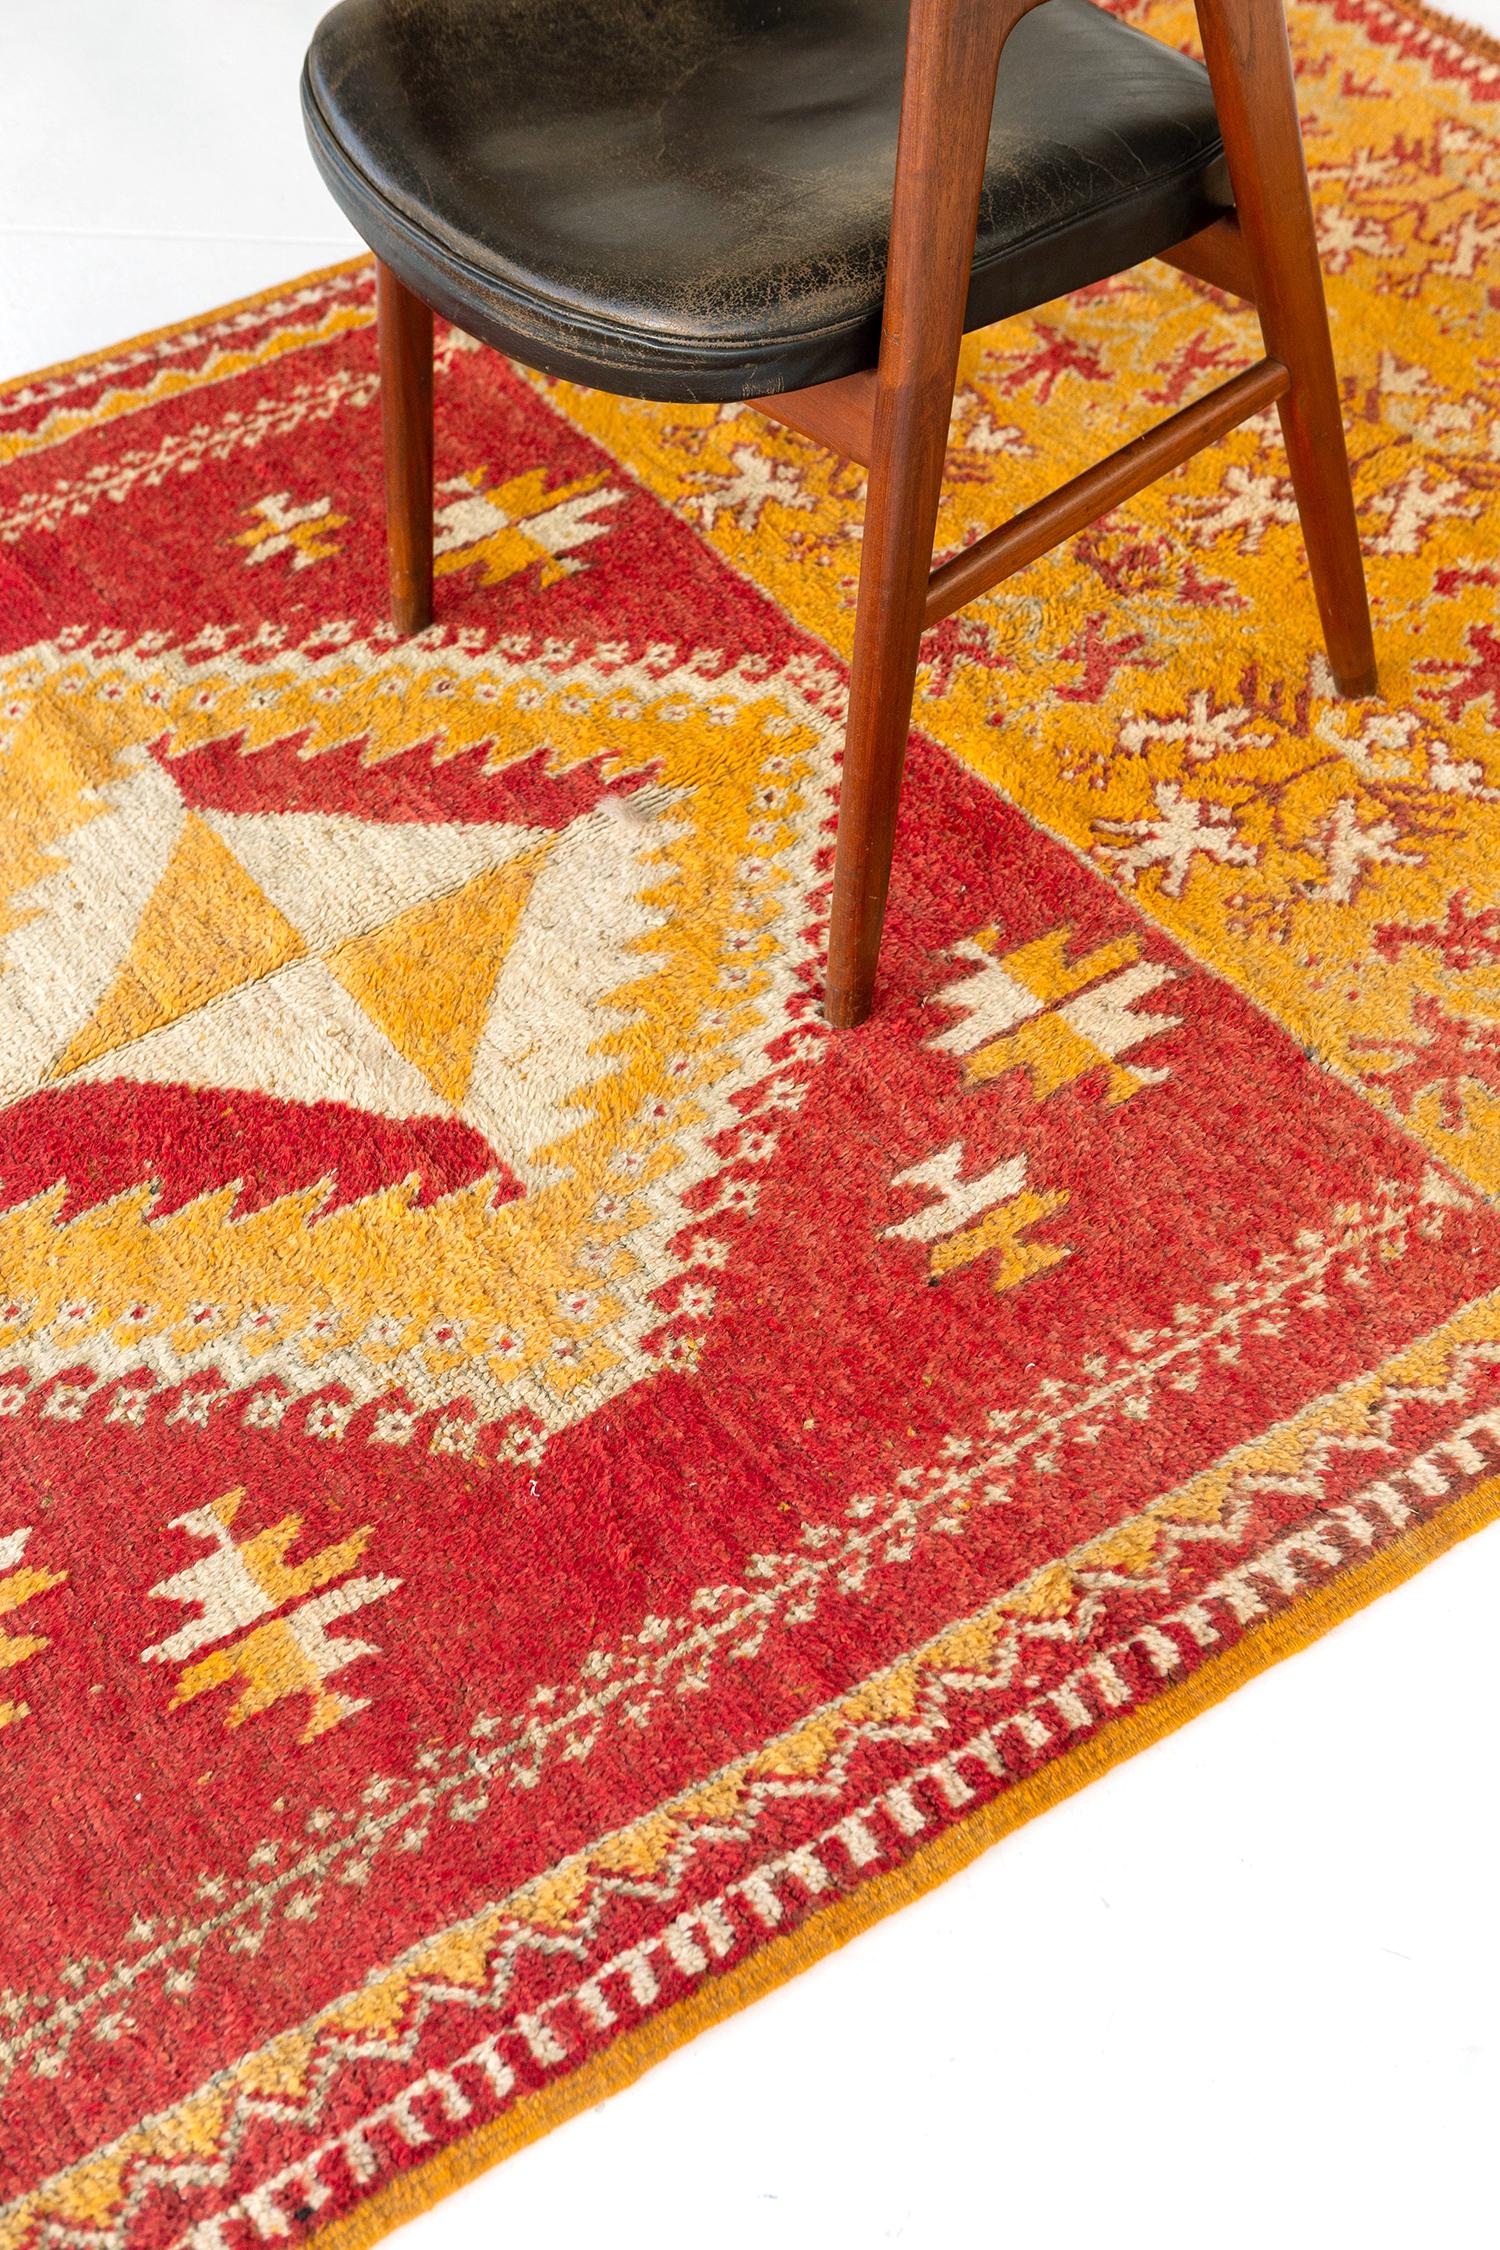 Taking the center stage is a vibrant lozenge medallion that is spread over the ornate floral motifs of this Vintage Moroccan rug inspired from High Atlas Tribe. Its vibrant vibe featuring the shades of yellow canary and orange that will make your